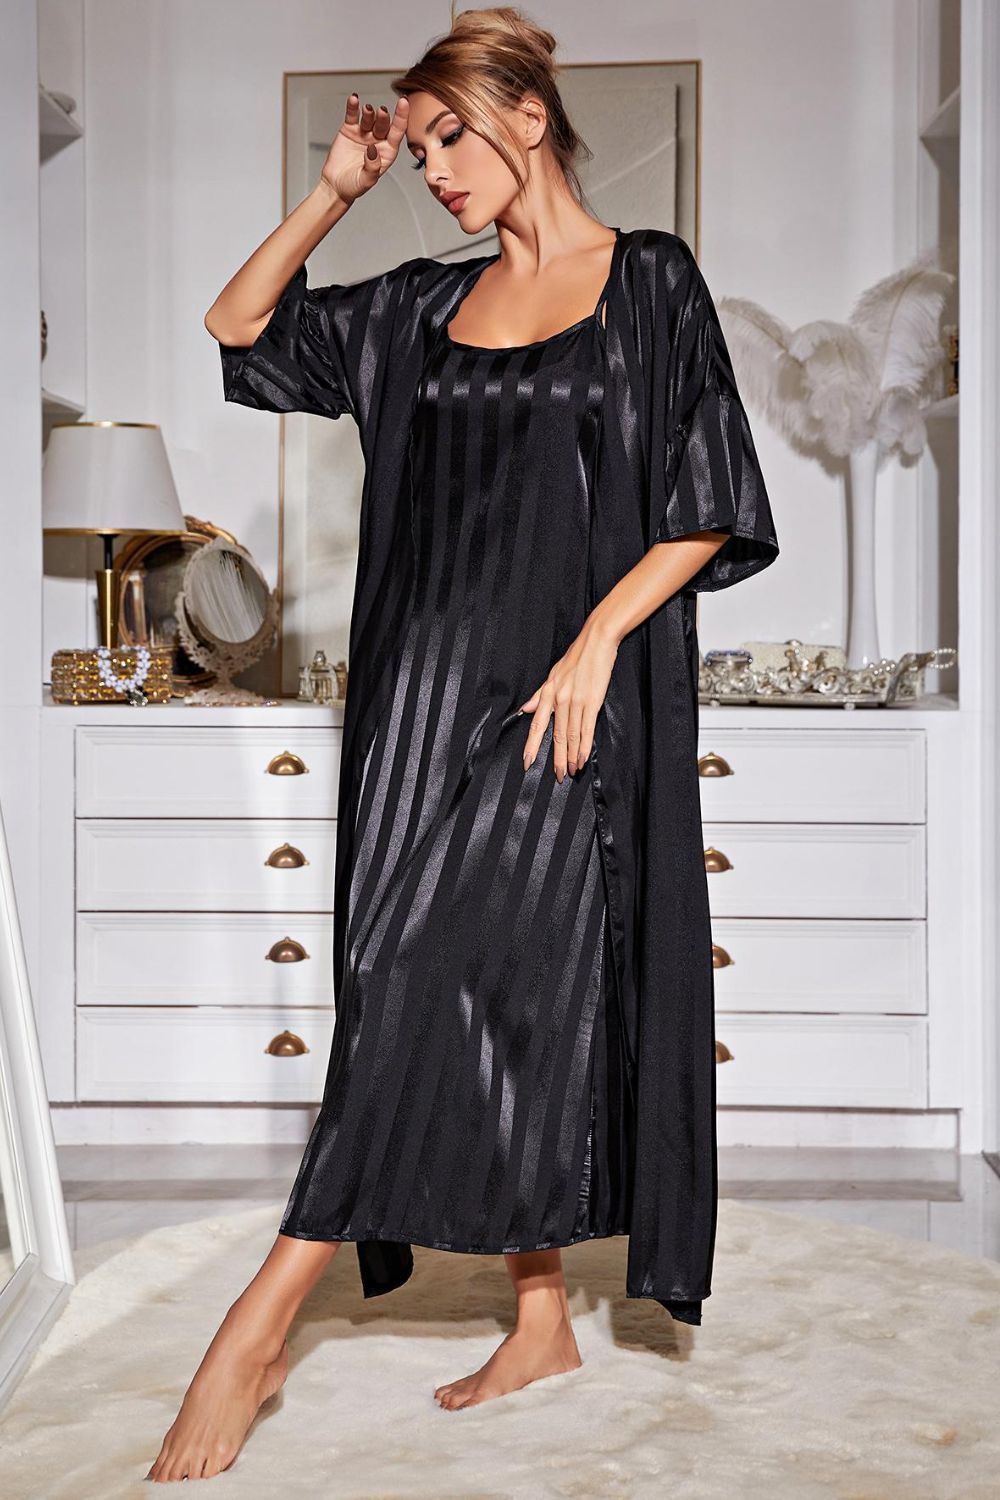 Angle view of woman standing in front of dresser wearing black striped nightgown and matching black striped robe